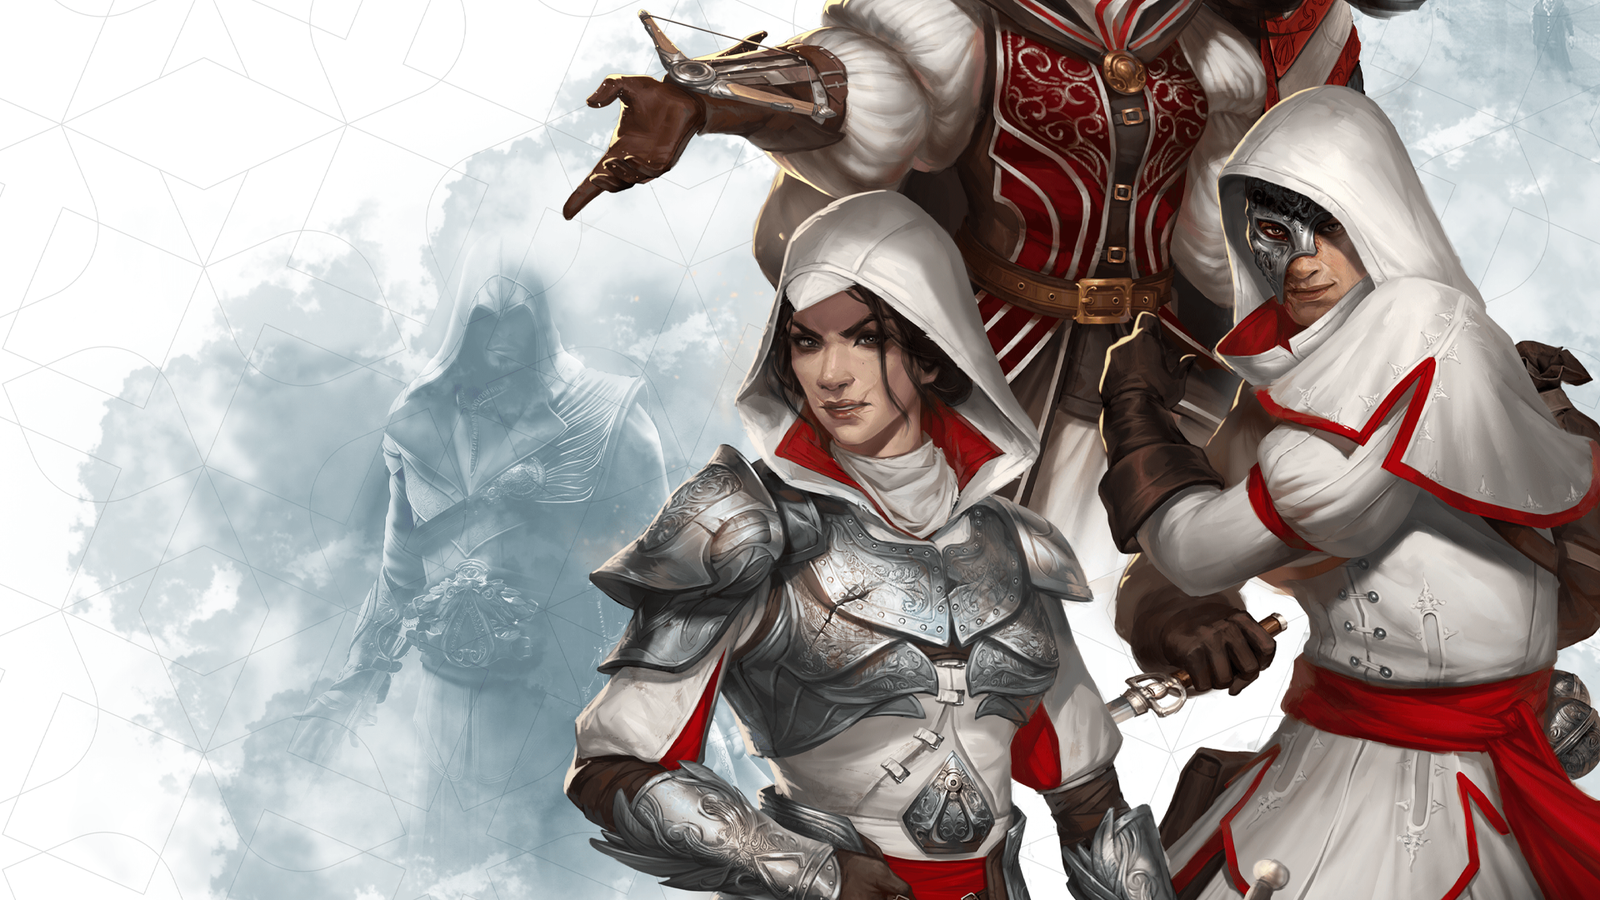 Assassin's Creed: Brotherhood of Venice board game getting retail release